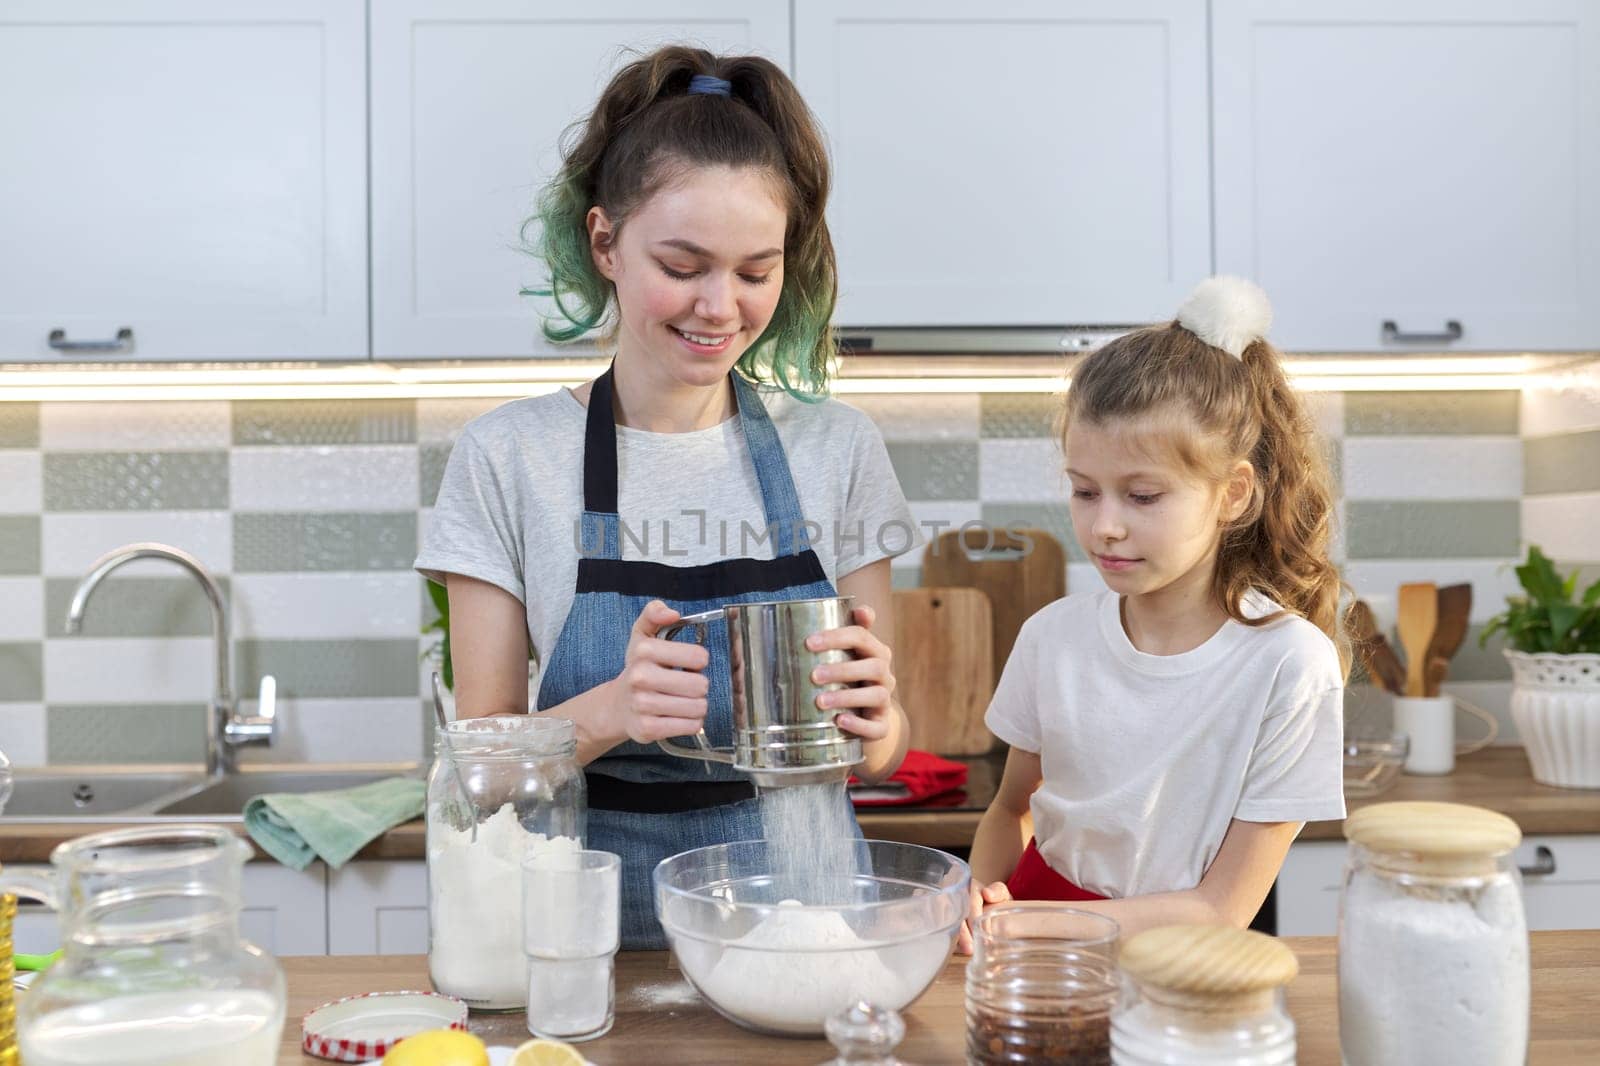 Two girls, teenager and younger sister, preparing cookies together in kitchen. Kids stir flour, the eldest shows the youngest. Family, friendship, fun, healthy homemade food